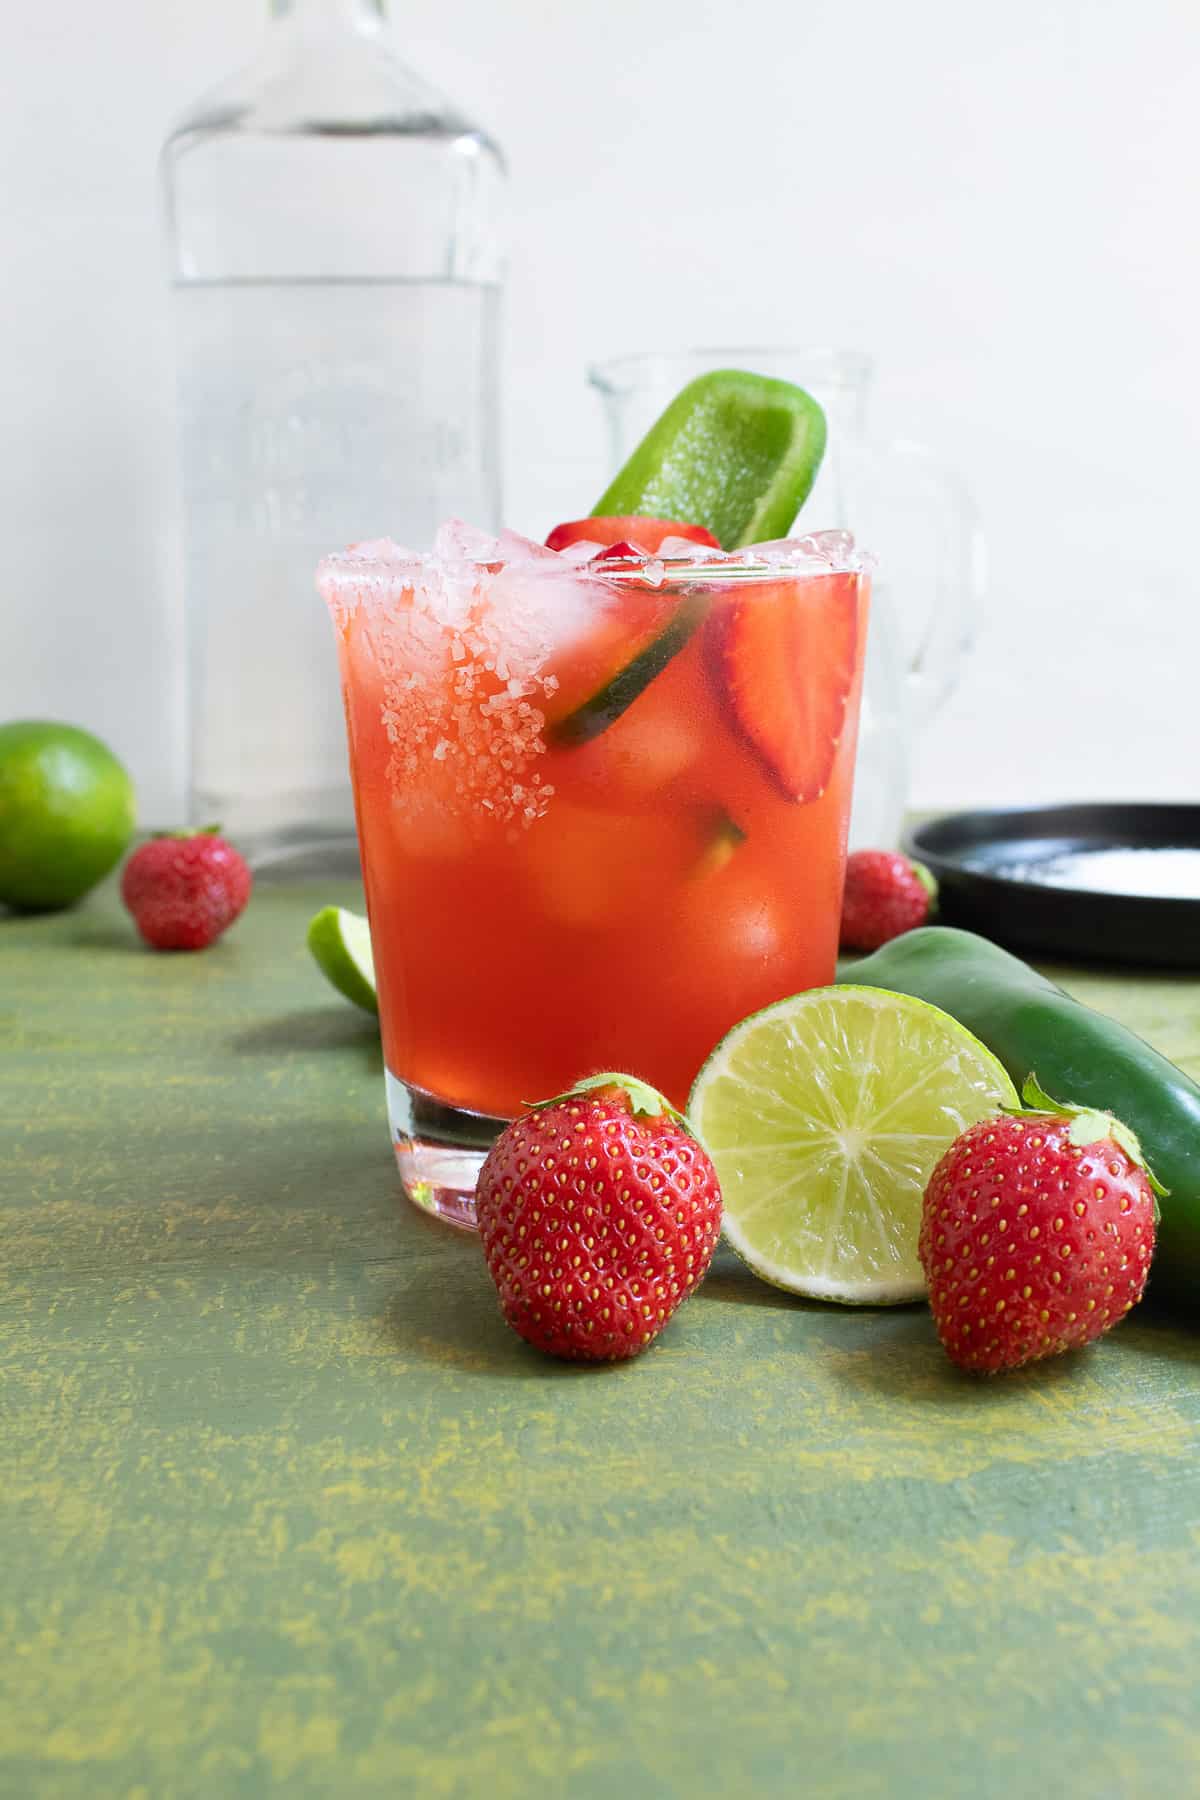 A rocks glass with a salted rim holds a red liquid and is garnished with a sliced strawberry and a slice of jalapeno. In fornt of the glass are two fresh strawberries, a sliced lime, and a fresh jalapeno.